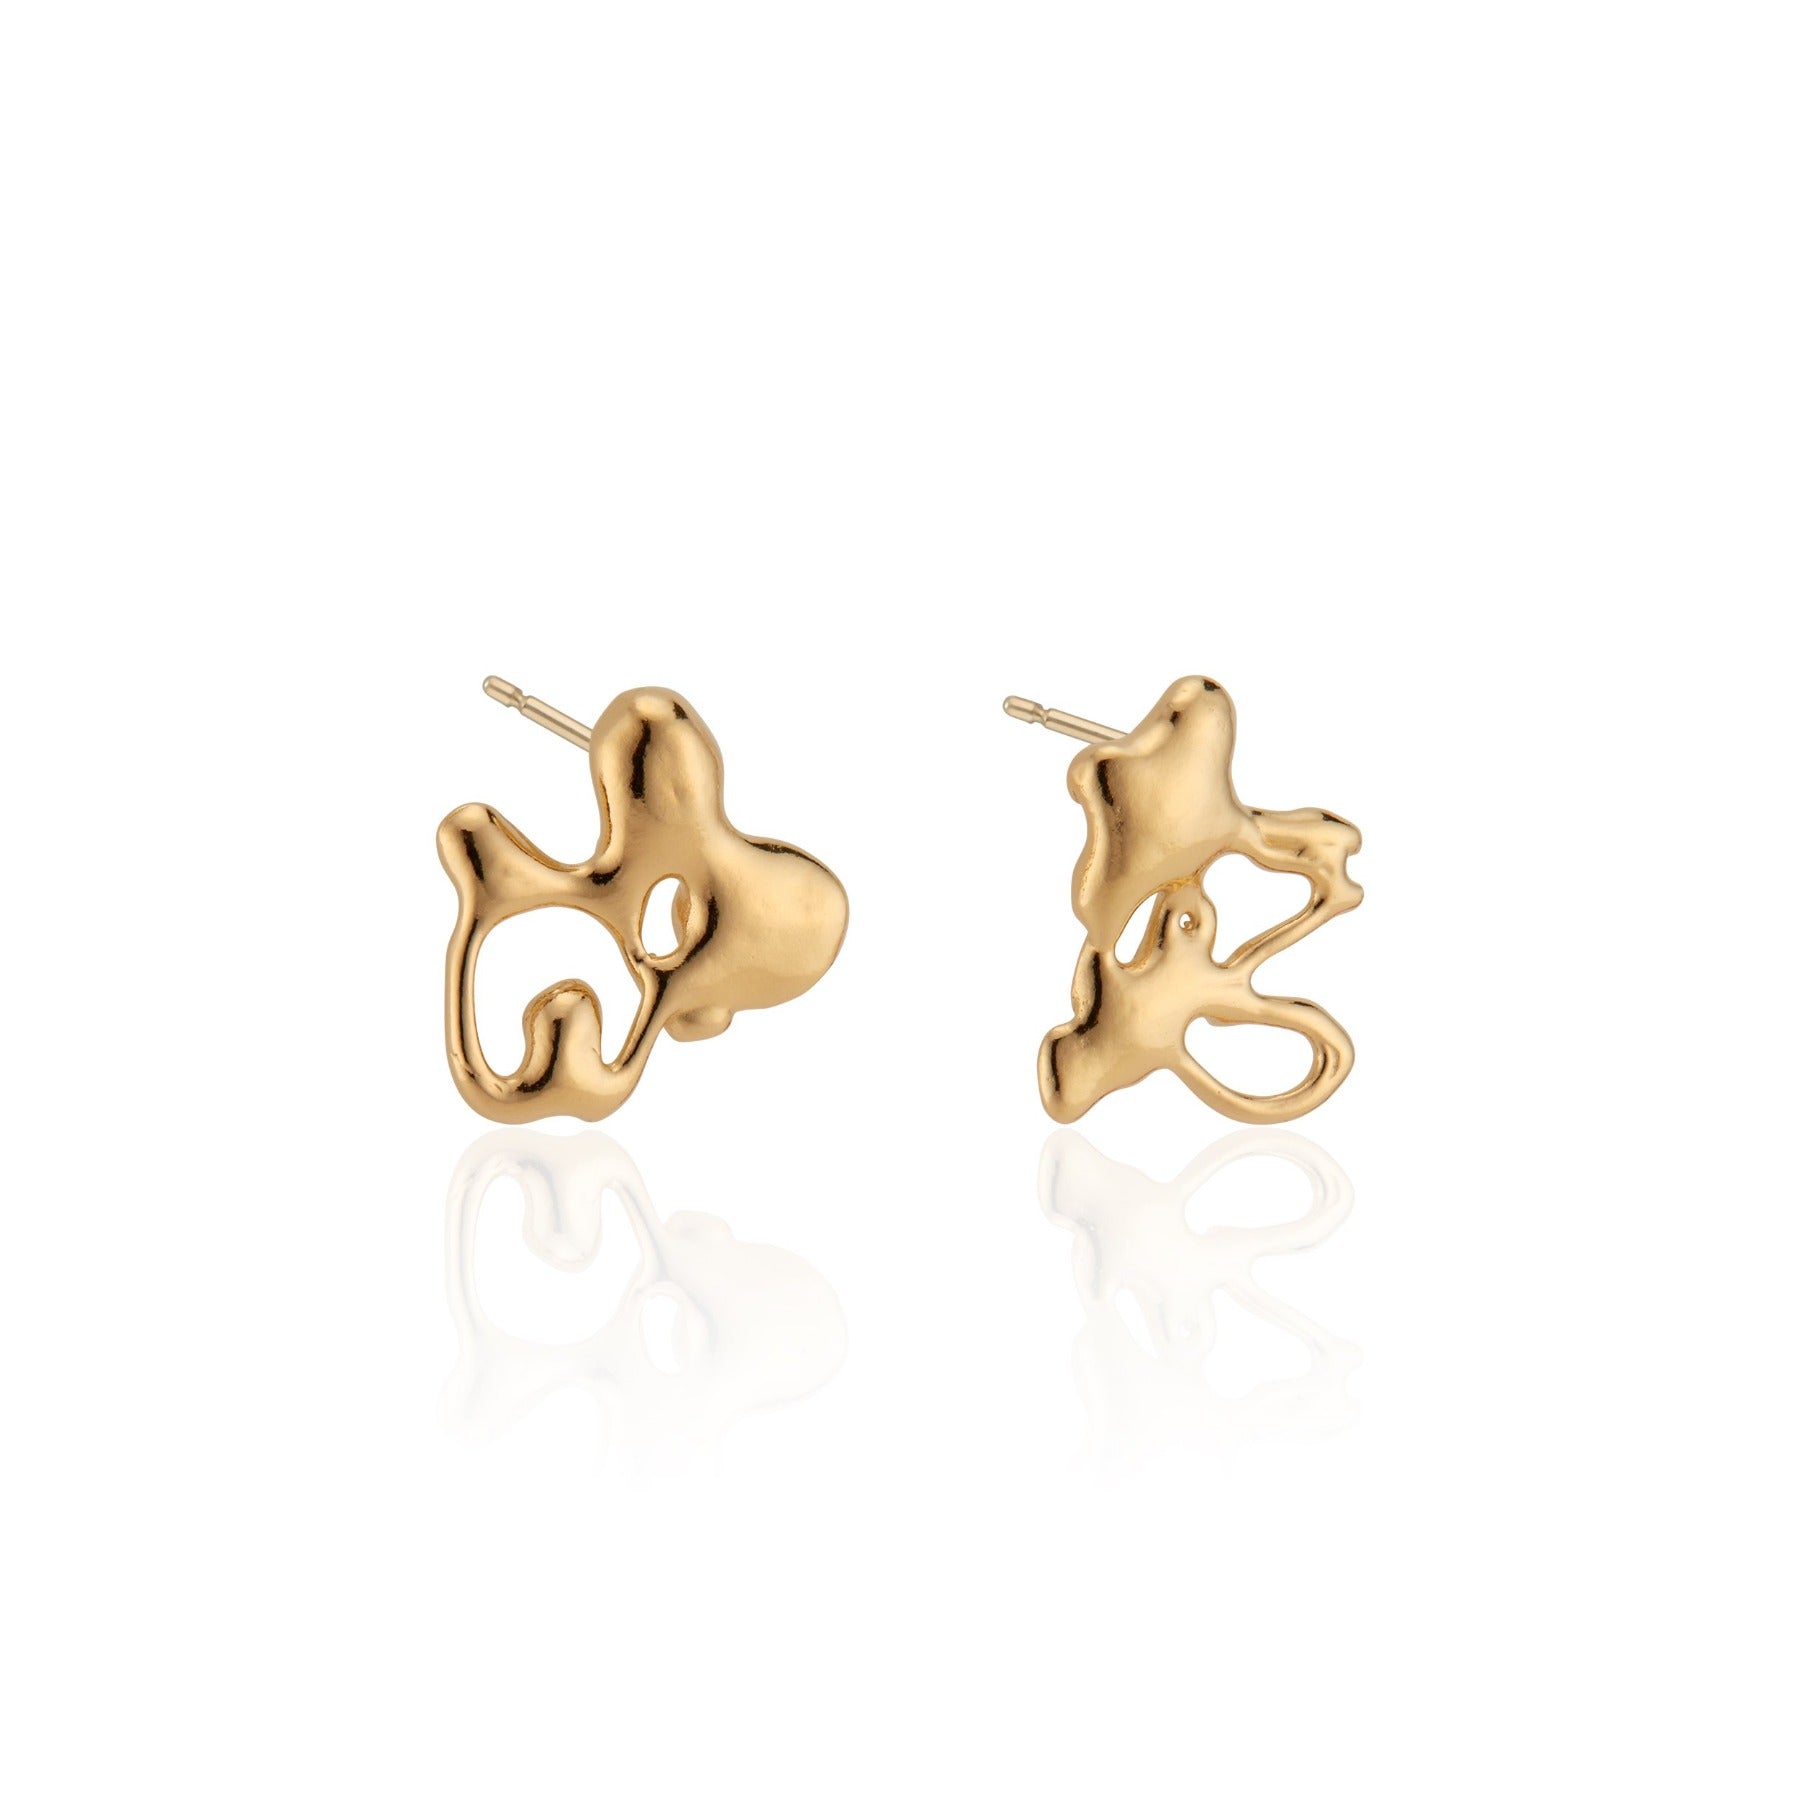 Abstract, squiggle puzzle piece stud earrings in 18k gold vermeil.